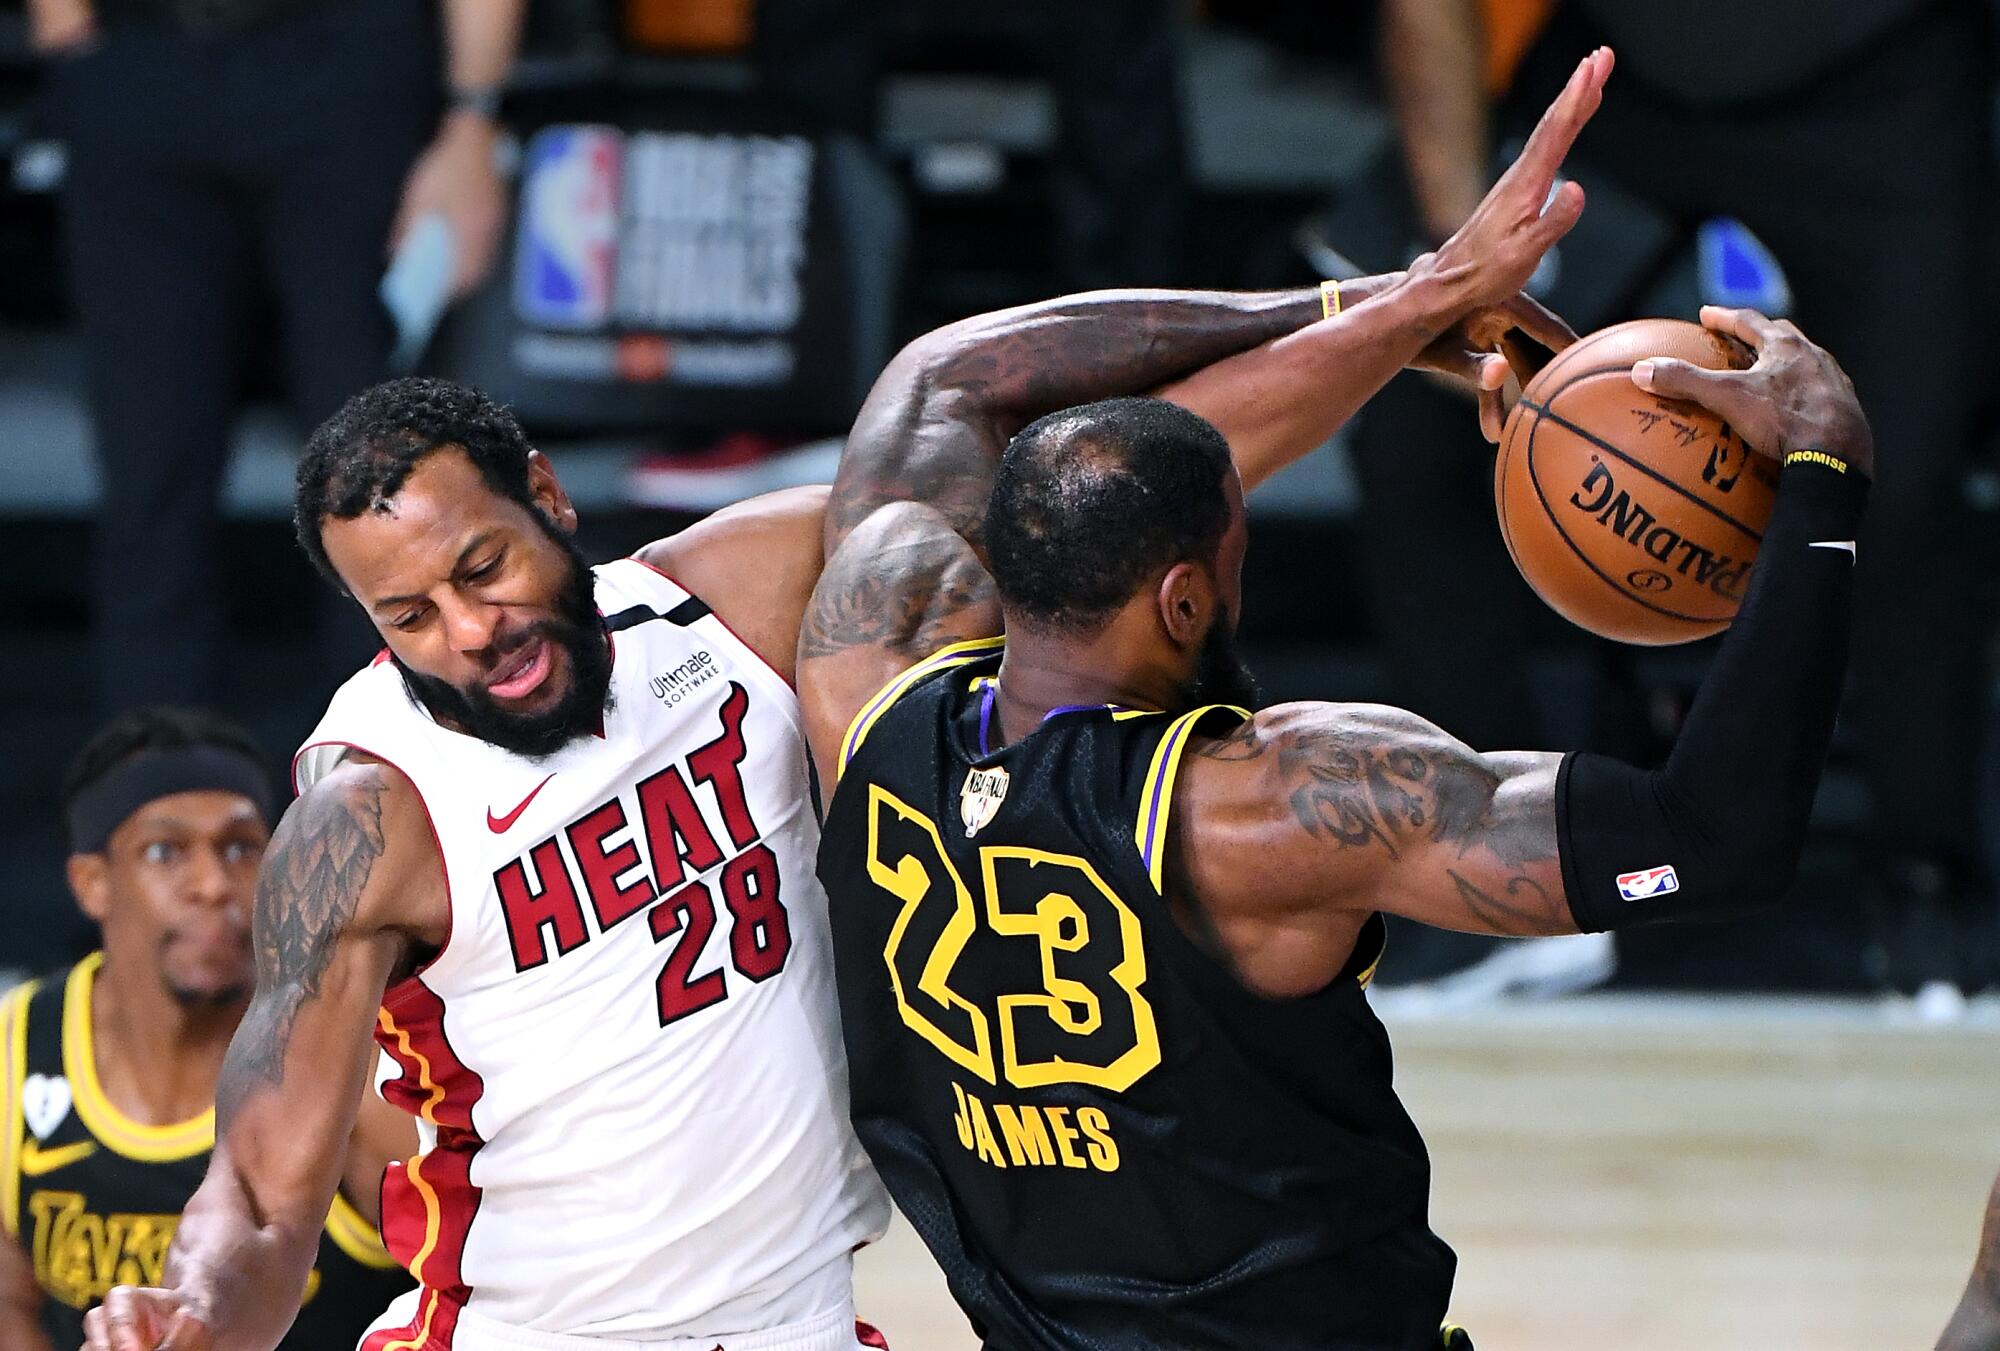 Lakers forward LeBron James grabs a rebound as he is fouled by Miami Heat guard Andre Iguodala.